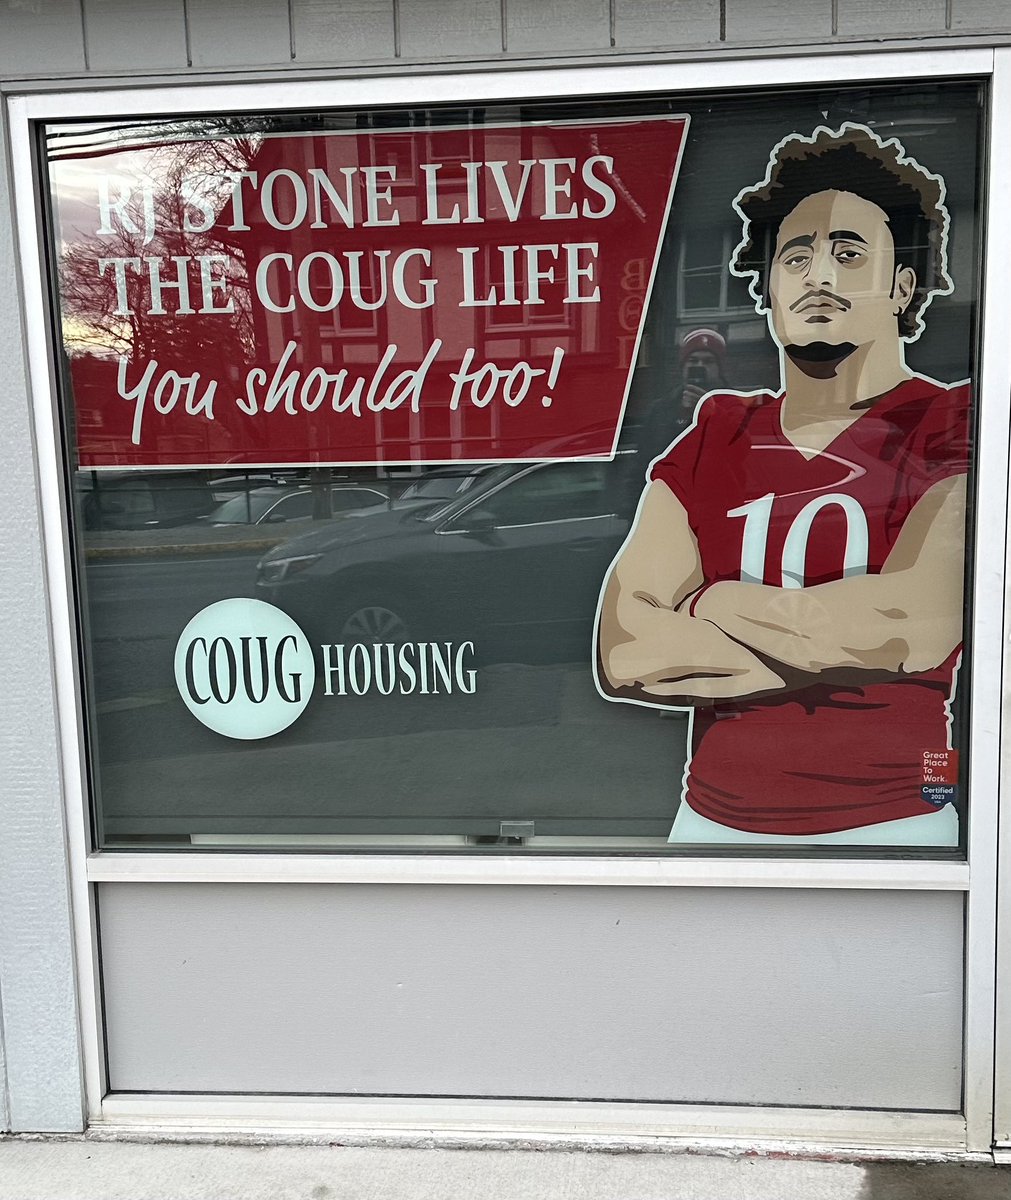 Saw this nugget of wisdom gold on my way in this morning! “C’MON”❗️@Rj___Stone #GOCOUGS